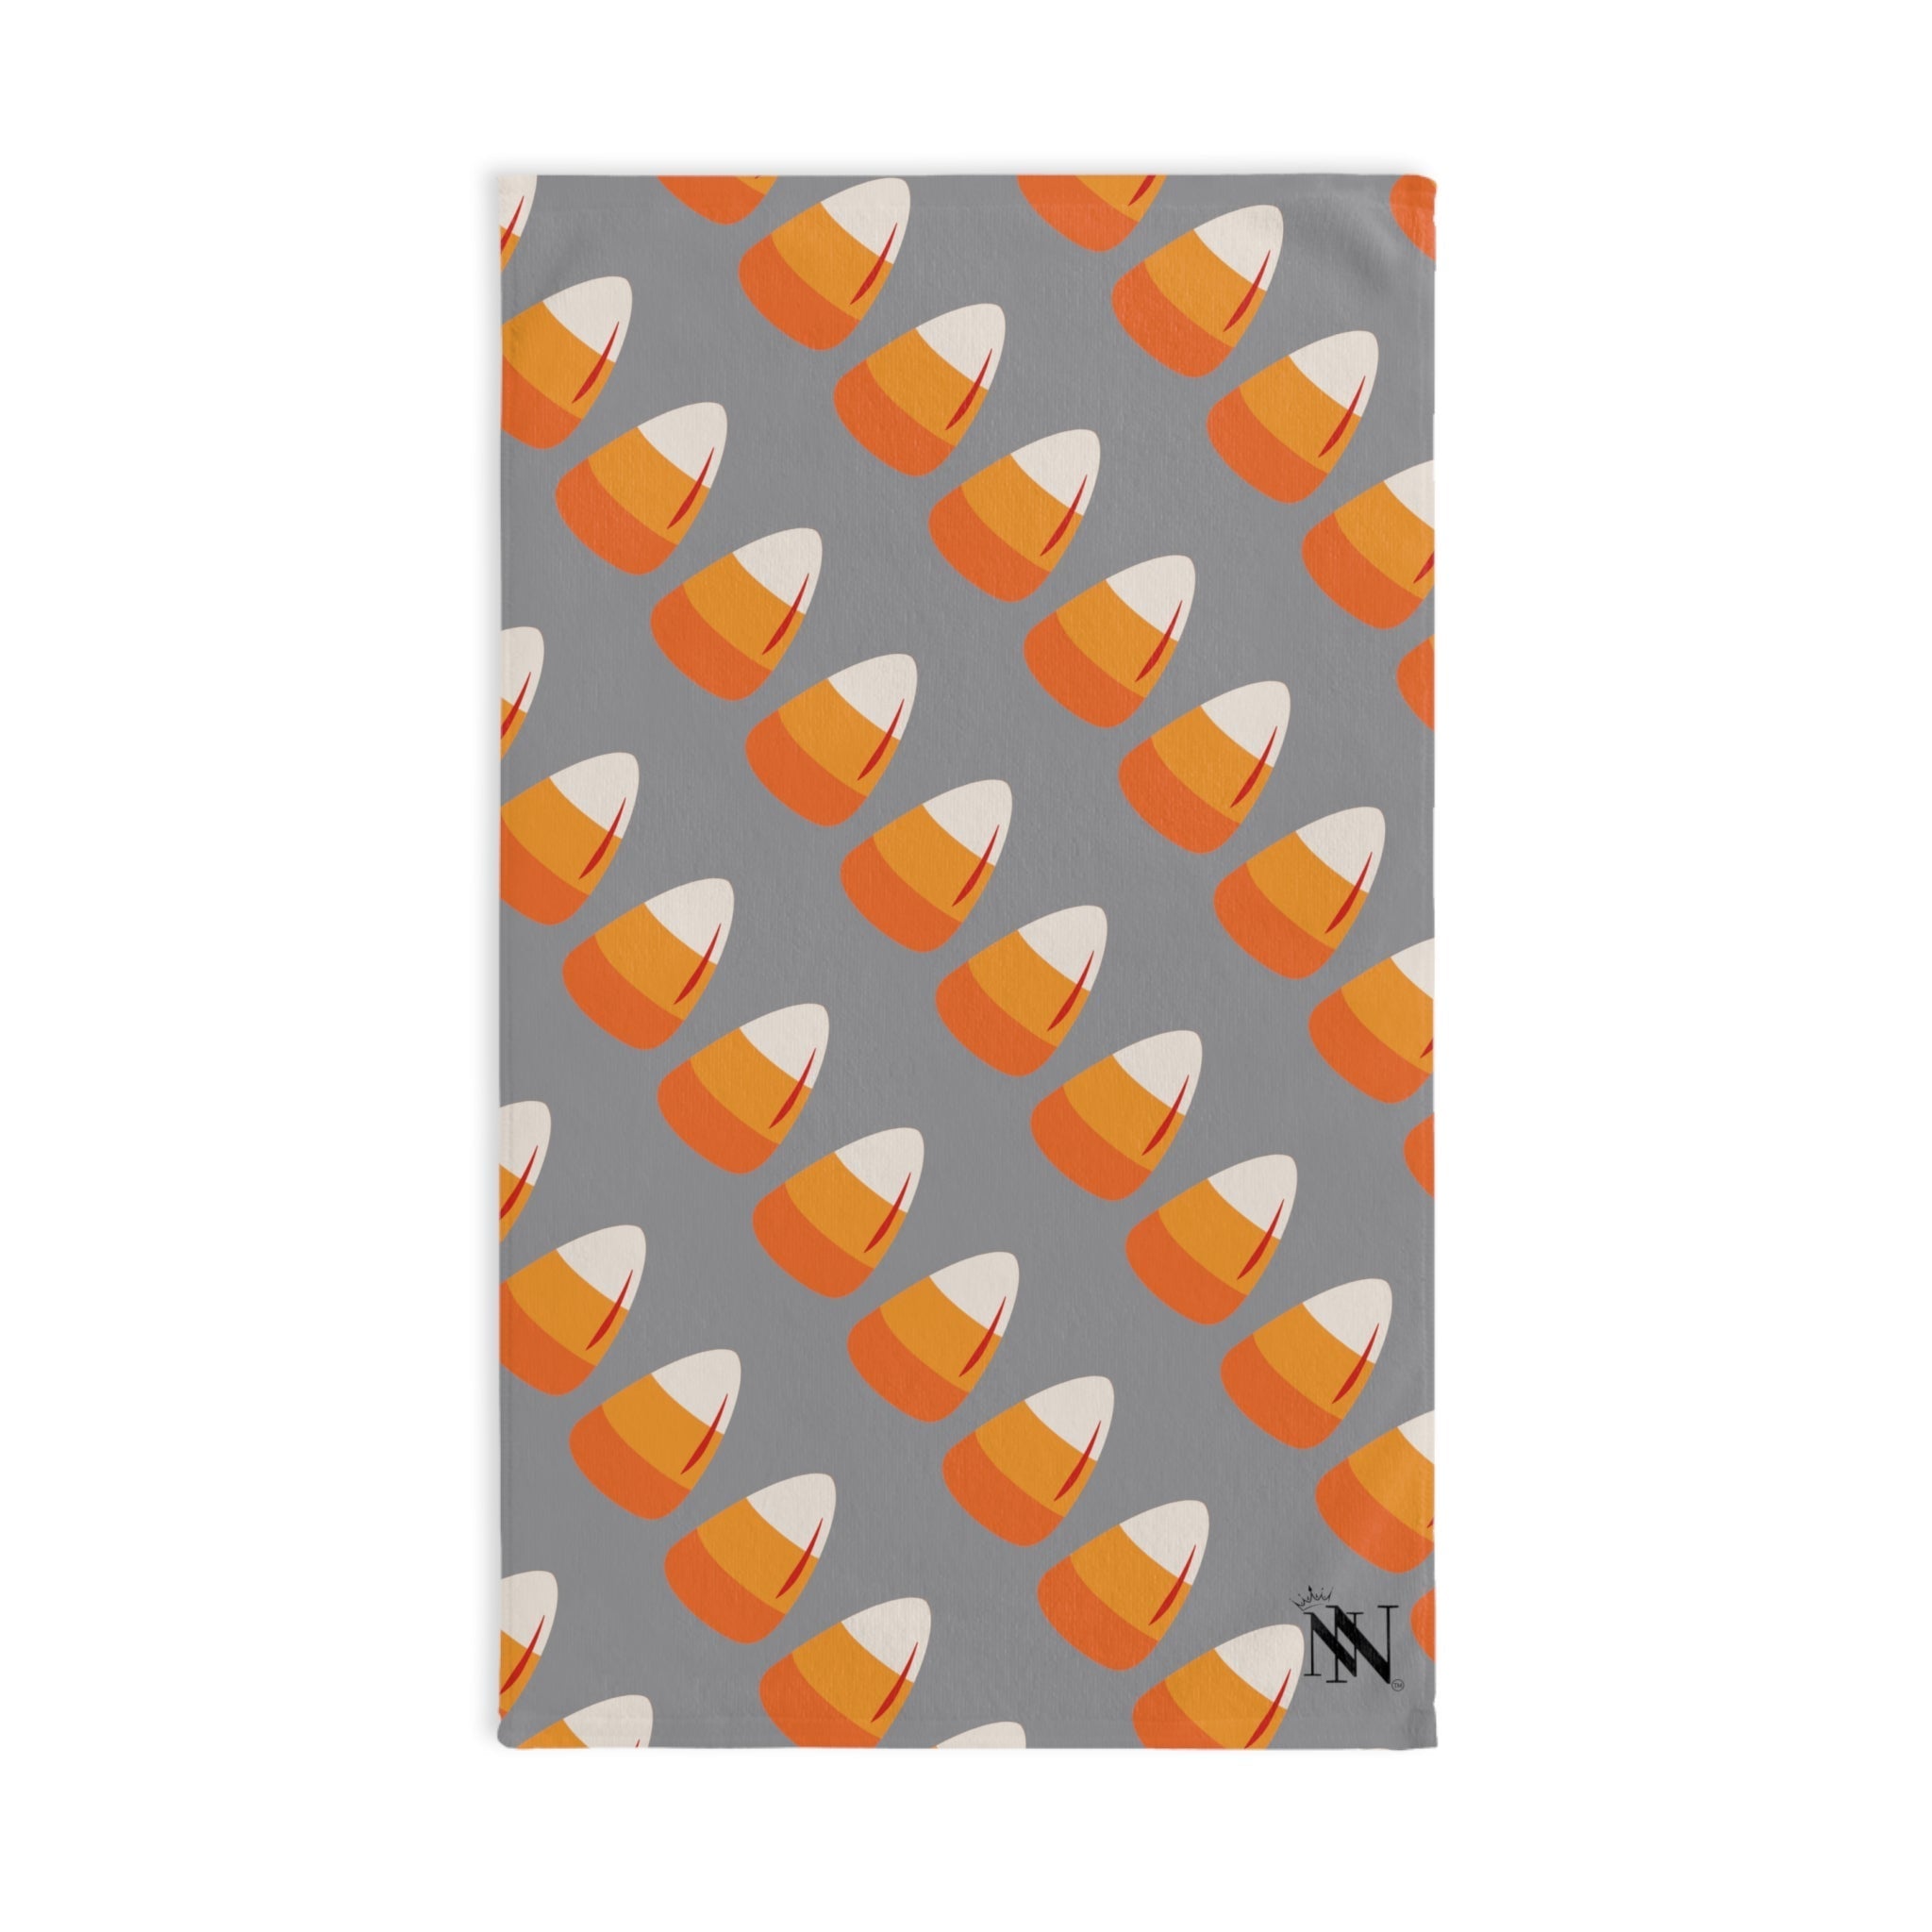 Candy Corn Grey | Anniversary Wedding, Christmas, Valentines Day, Birthday Gifts for Him, Her, Romantic Gifts for Wife, Girlfriend, Couples Gifts for Boyfriend, Husband NECTAR NAPKINS